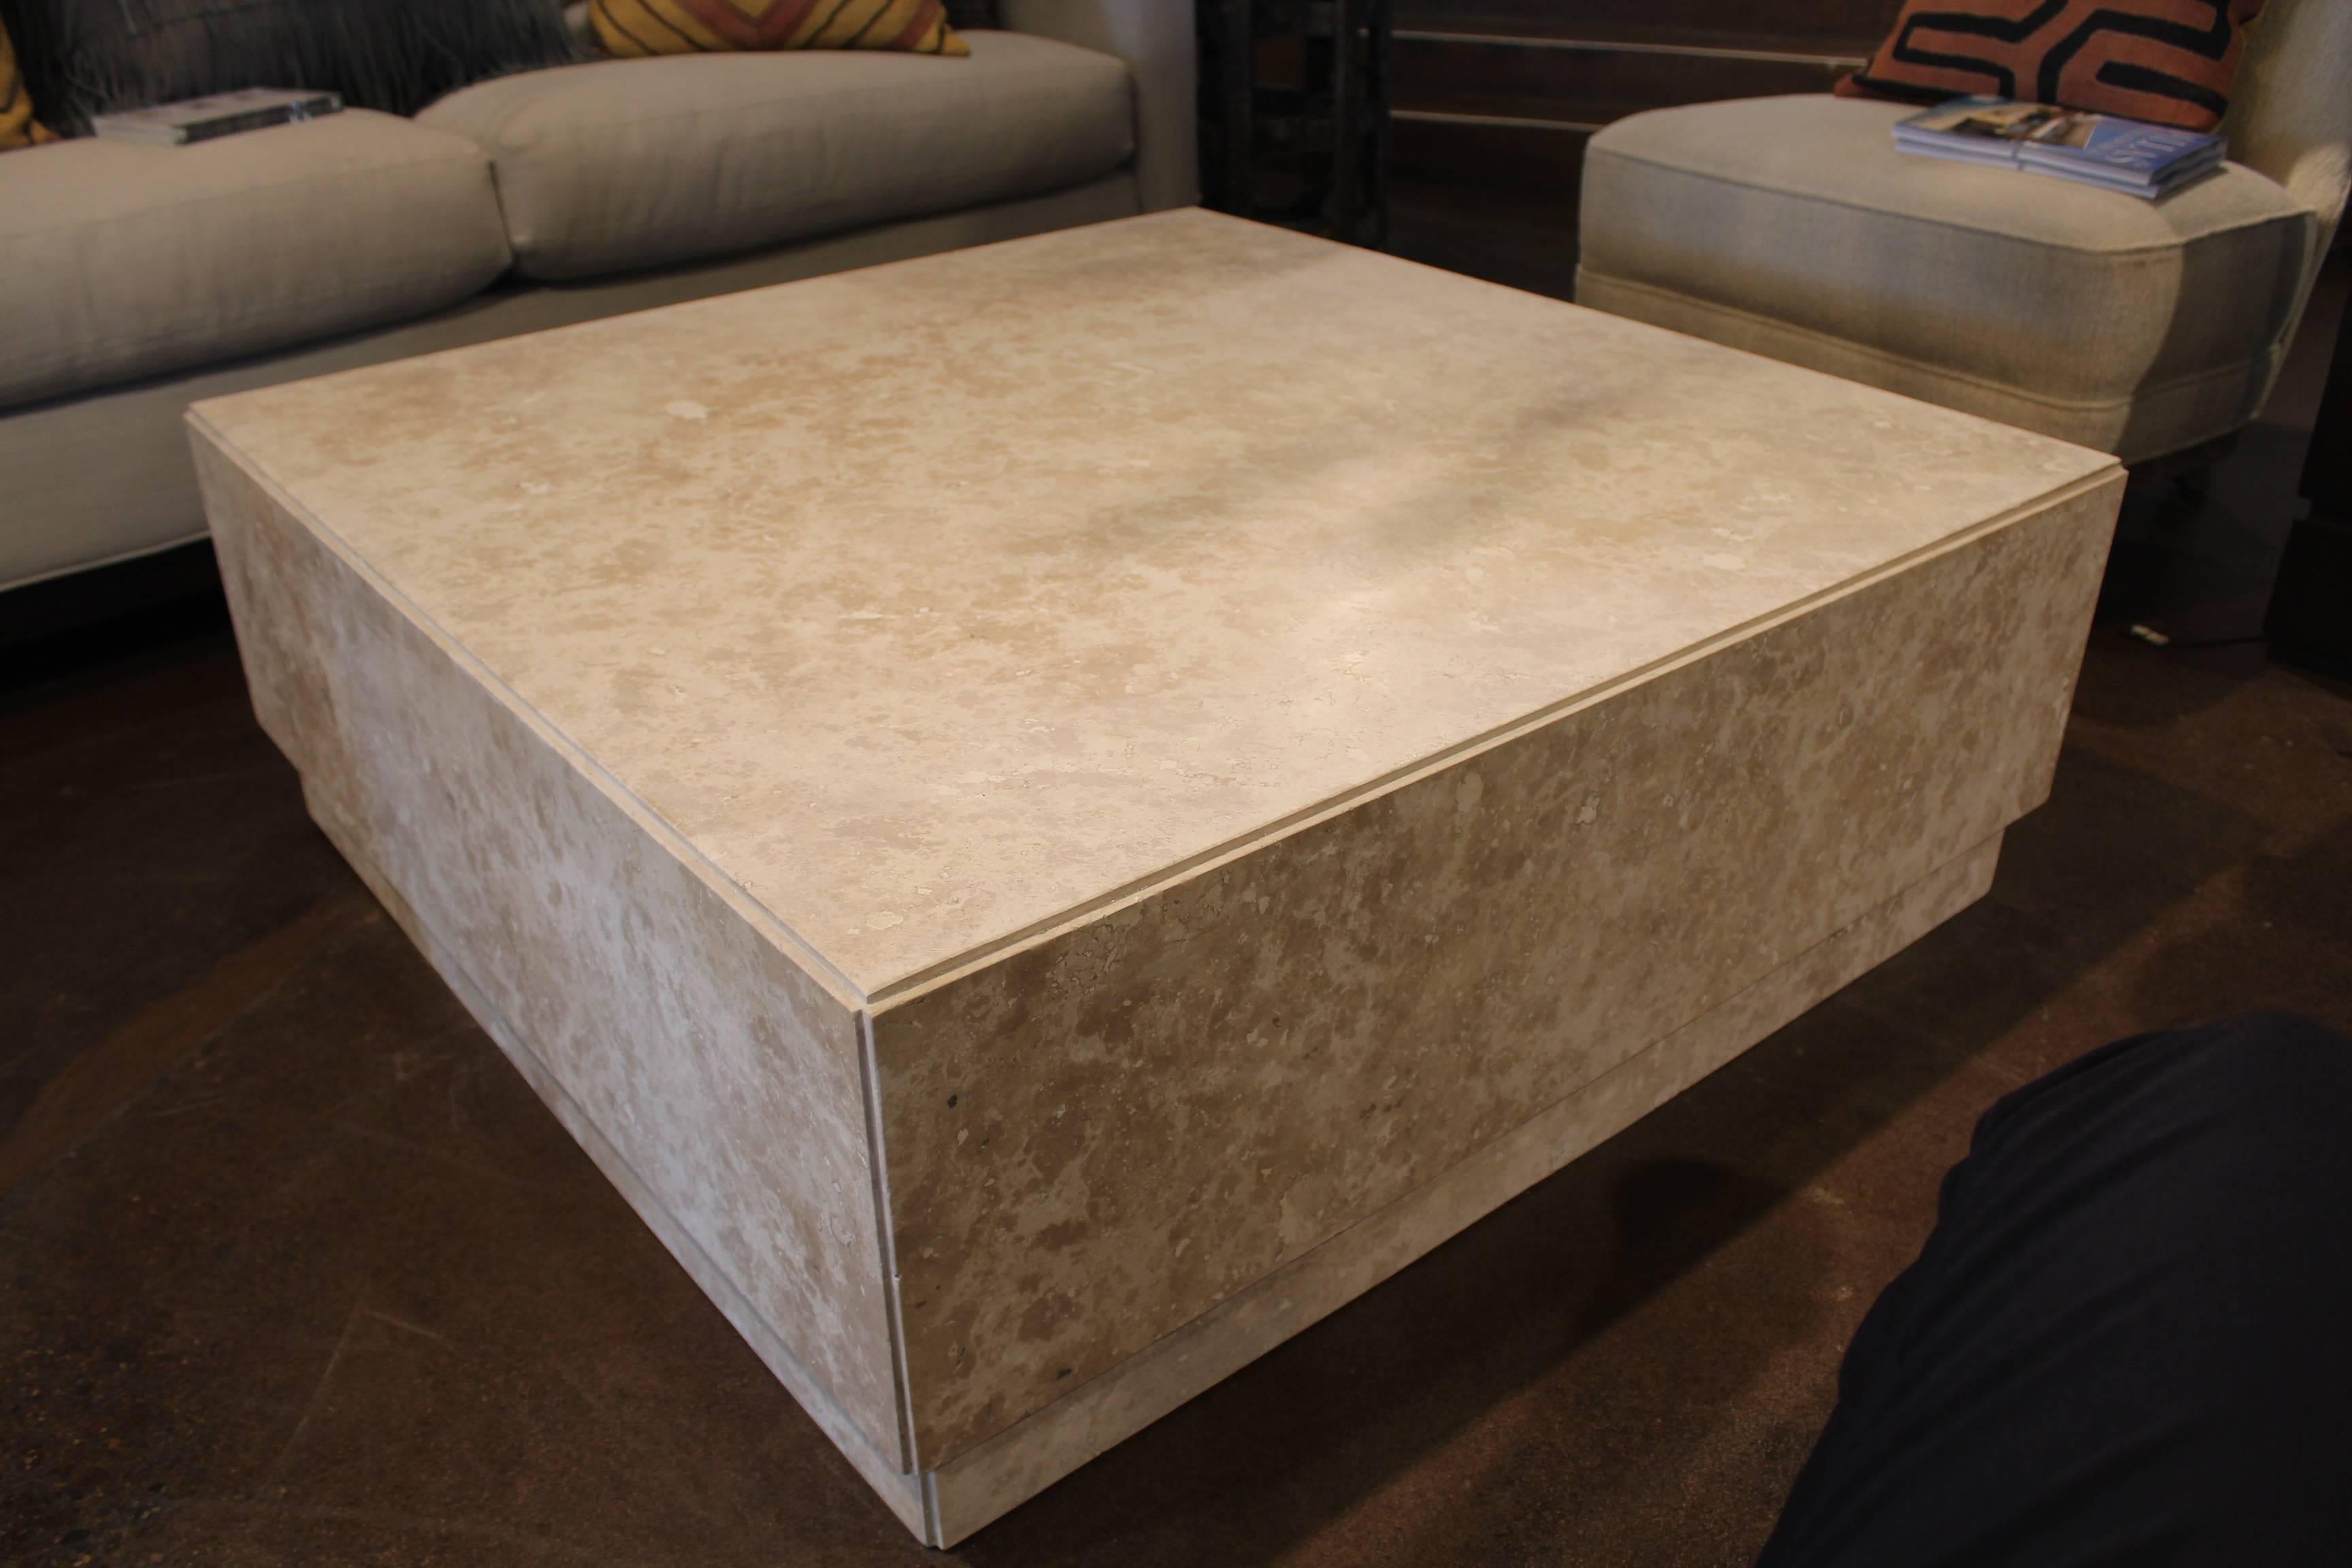 Modern Contemporary Coffee Table with Mitered Corners in Honed Travertine Marble